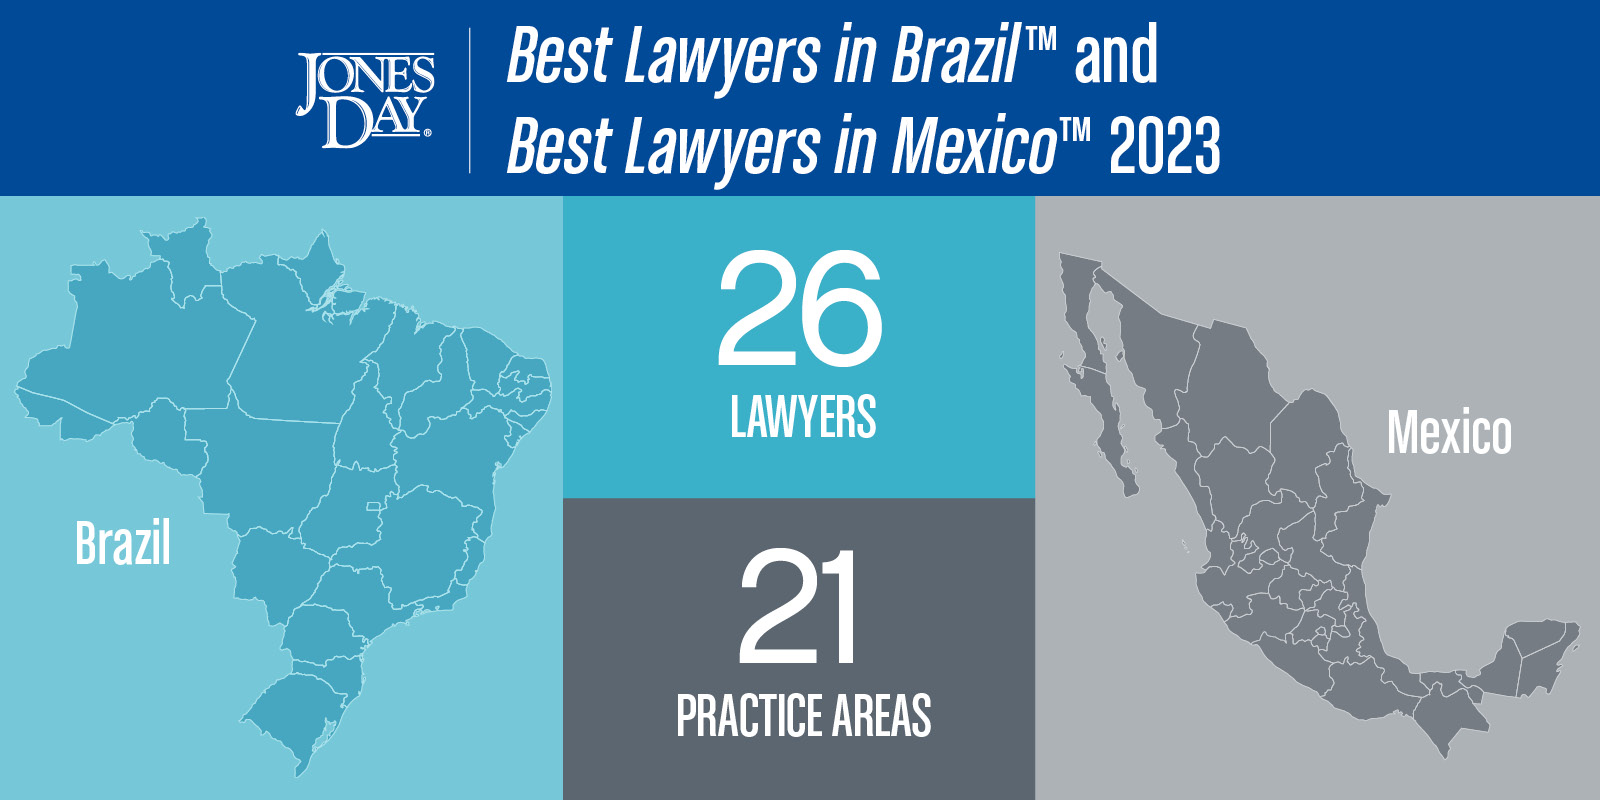 Best Lawyers in Brazil and Mexico Infographic202